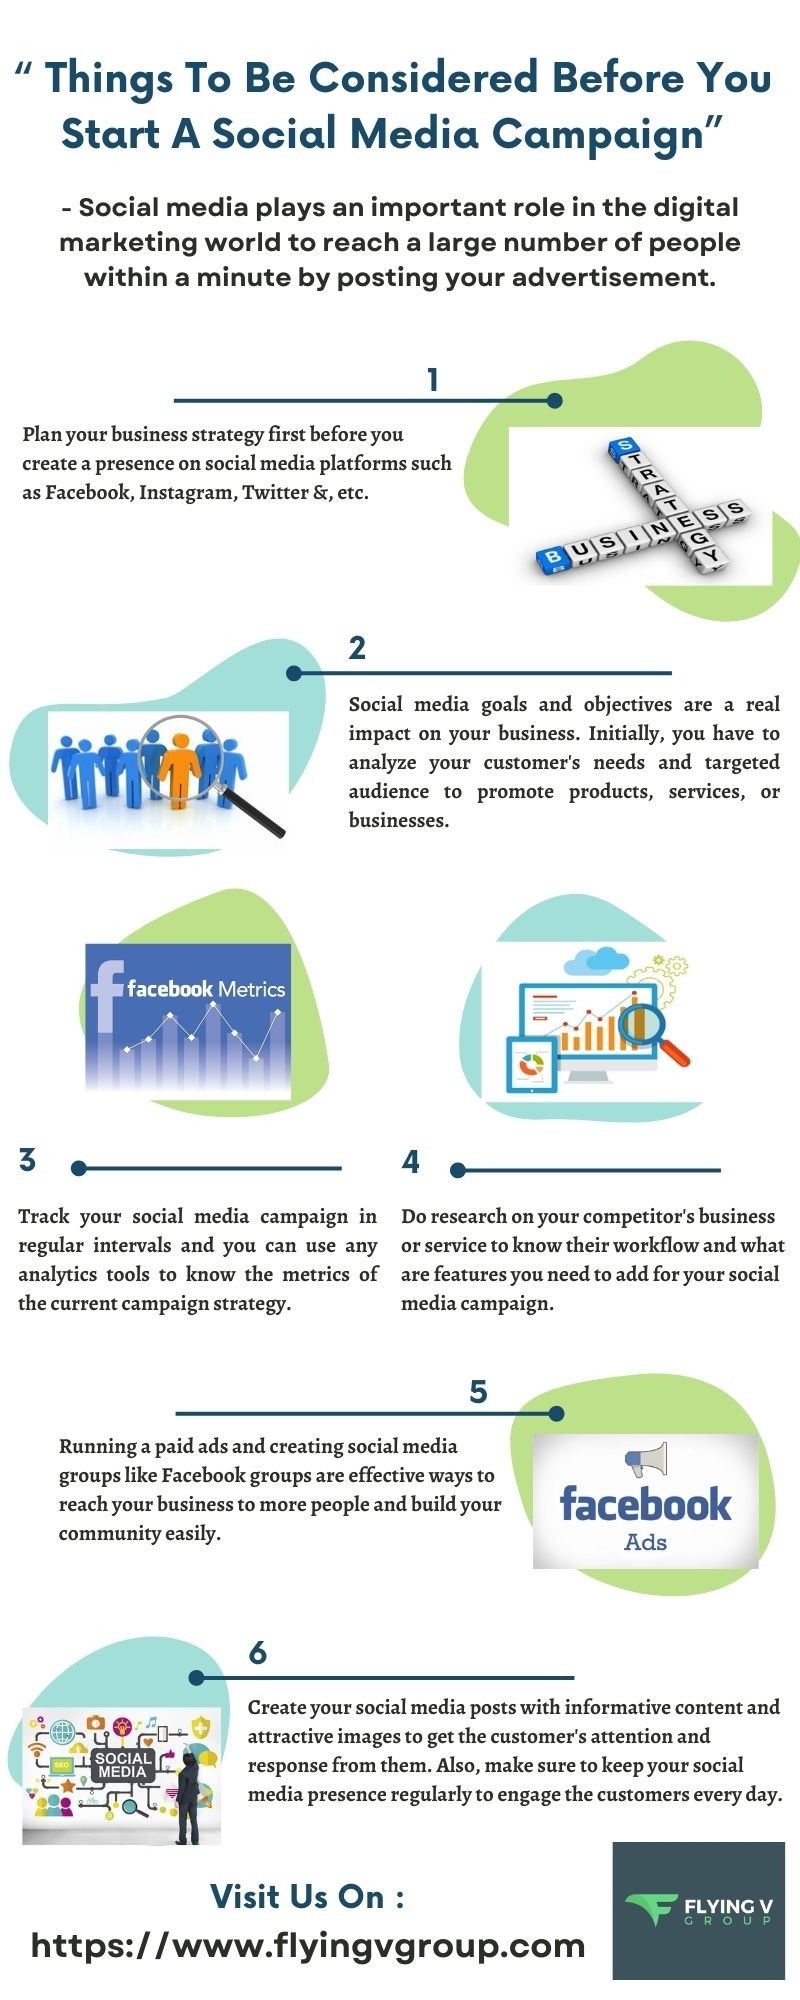 Things To Be Considered Before You Start A Social Media Campaign